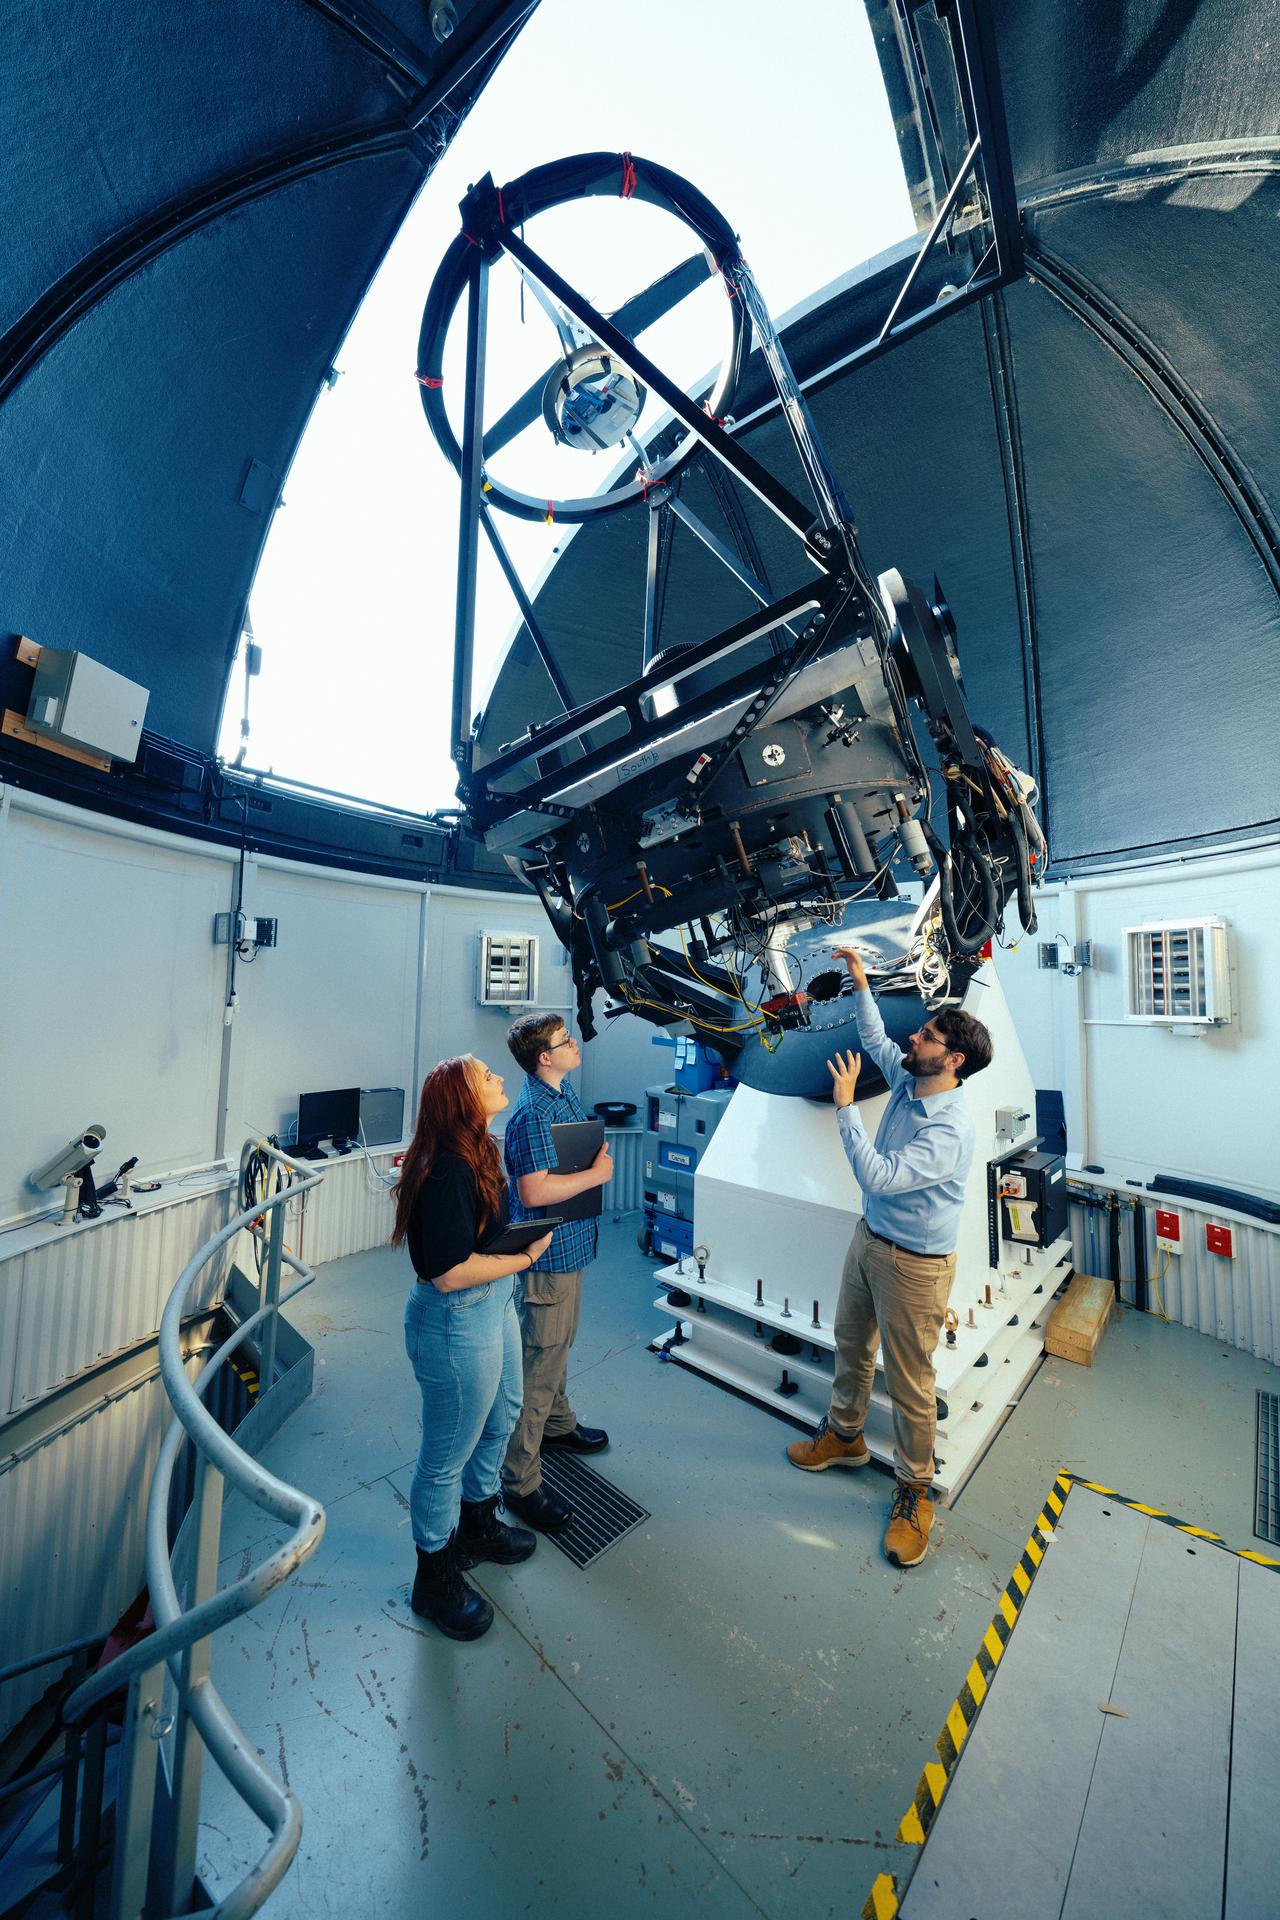 Physics students Morgan Febey and Oliver White take a close look at one of the optical telescopes at Greenhill Observatory with telescope technical officer Bryn Emptage.